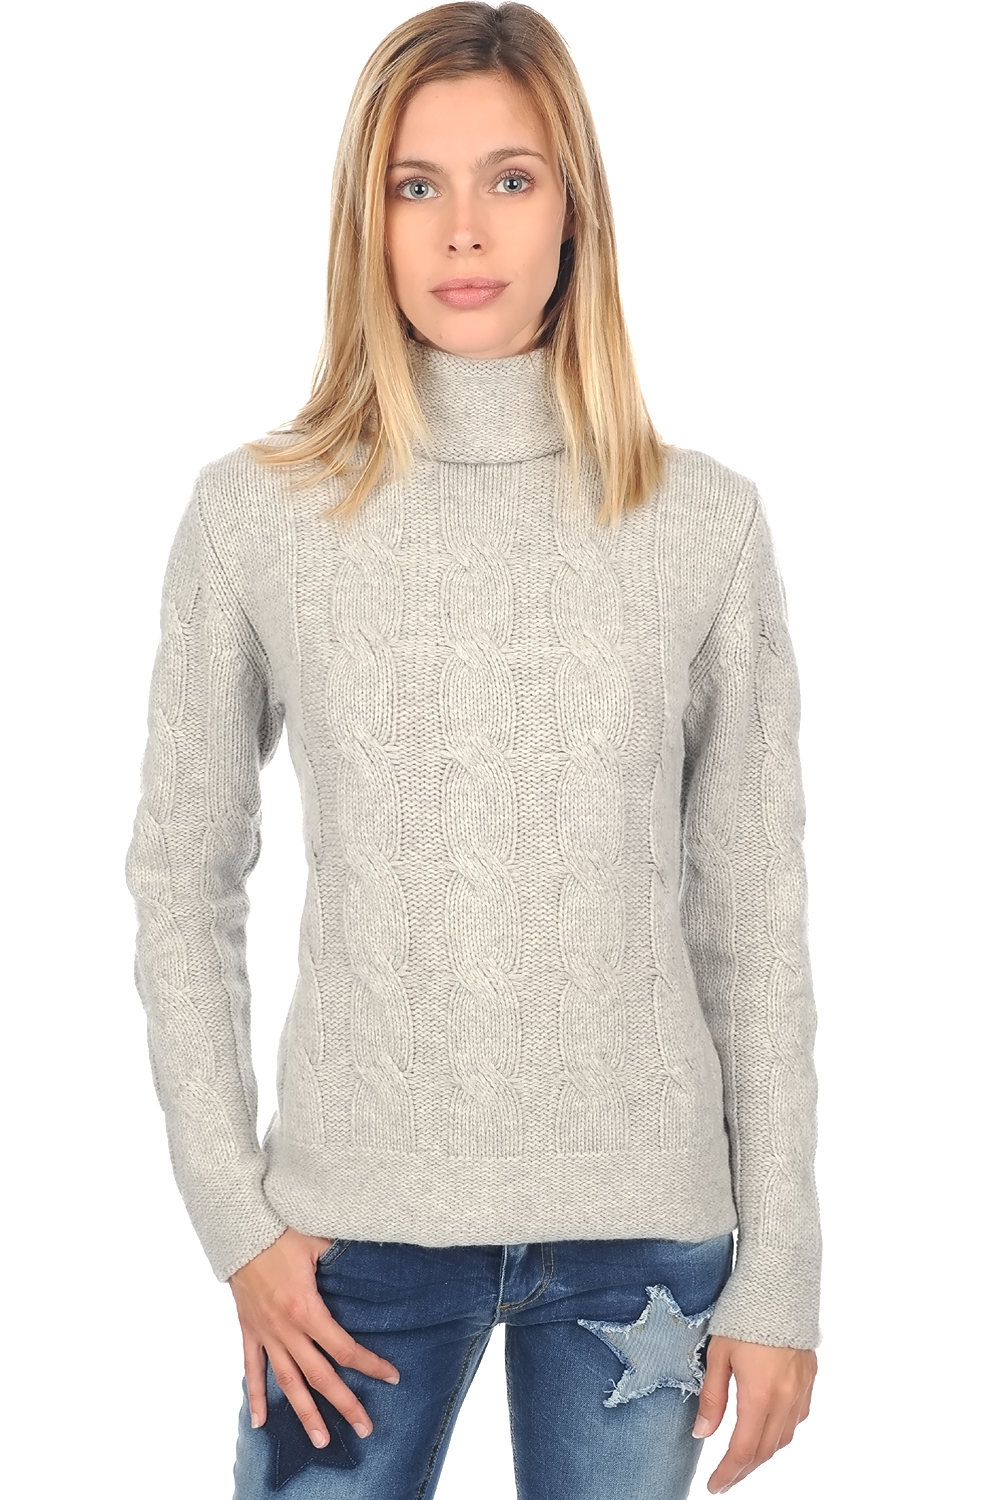 Cachemire pull femme col roule blanche flanelle chine l